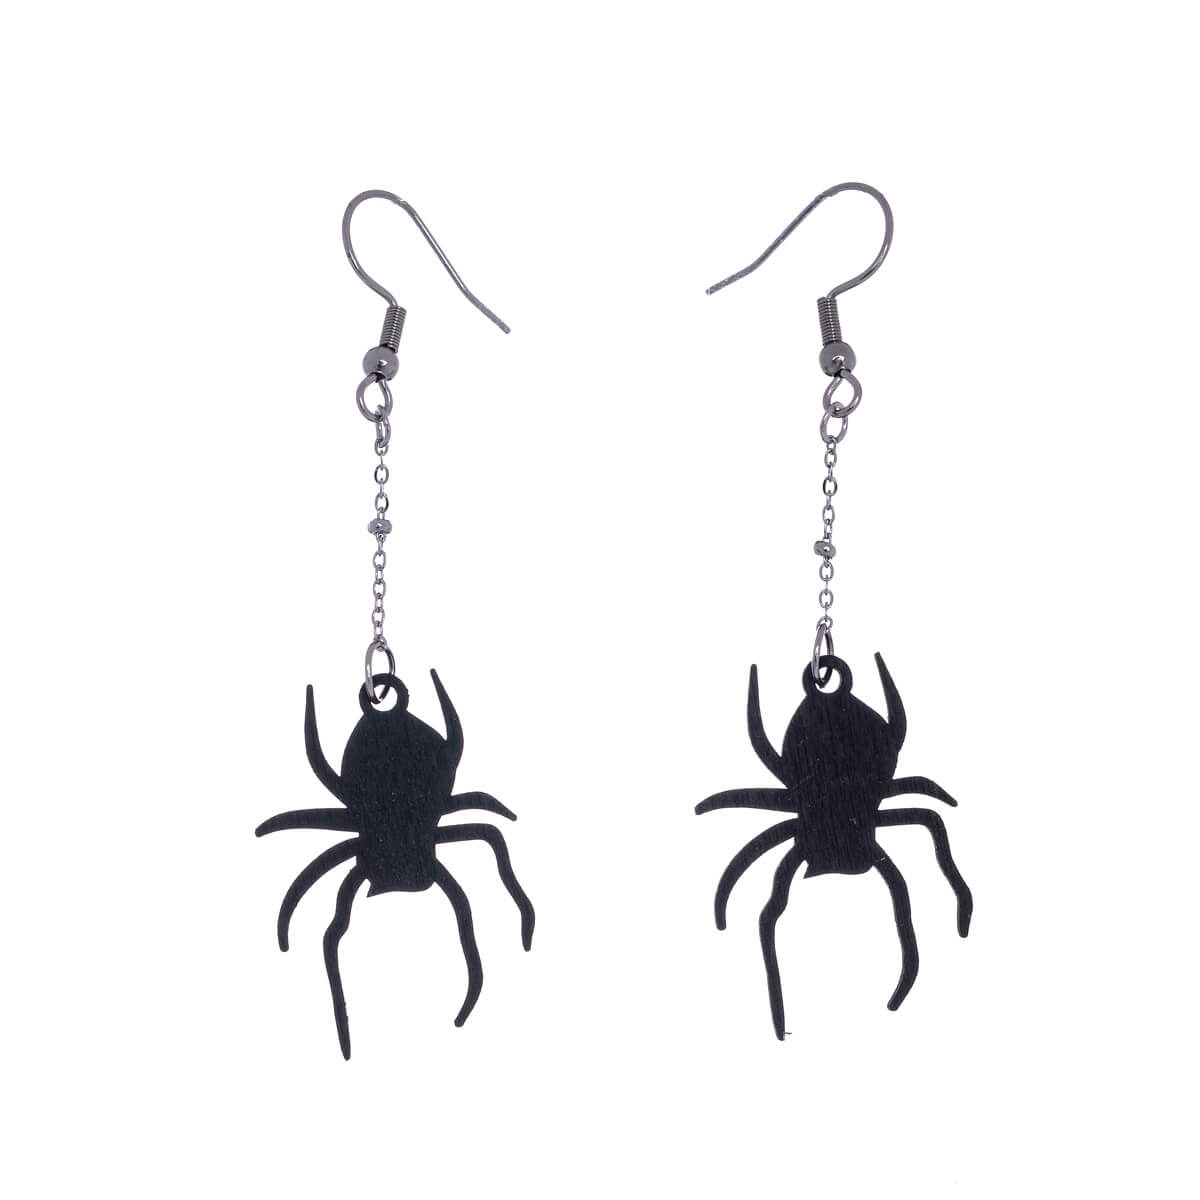 Wooden spider earrings on chain - Made in Finland (Steel 316L)